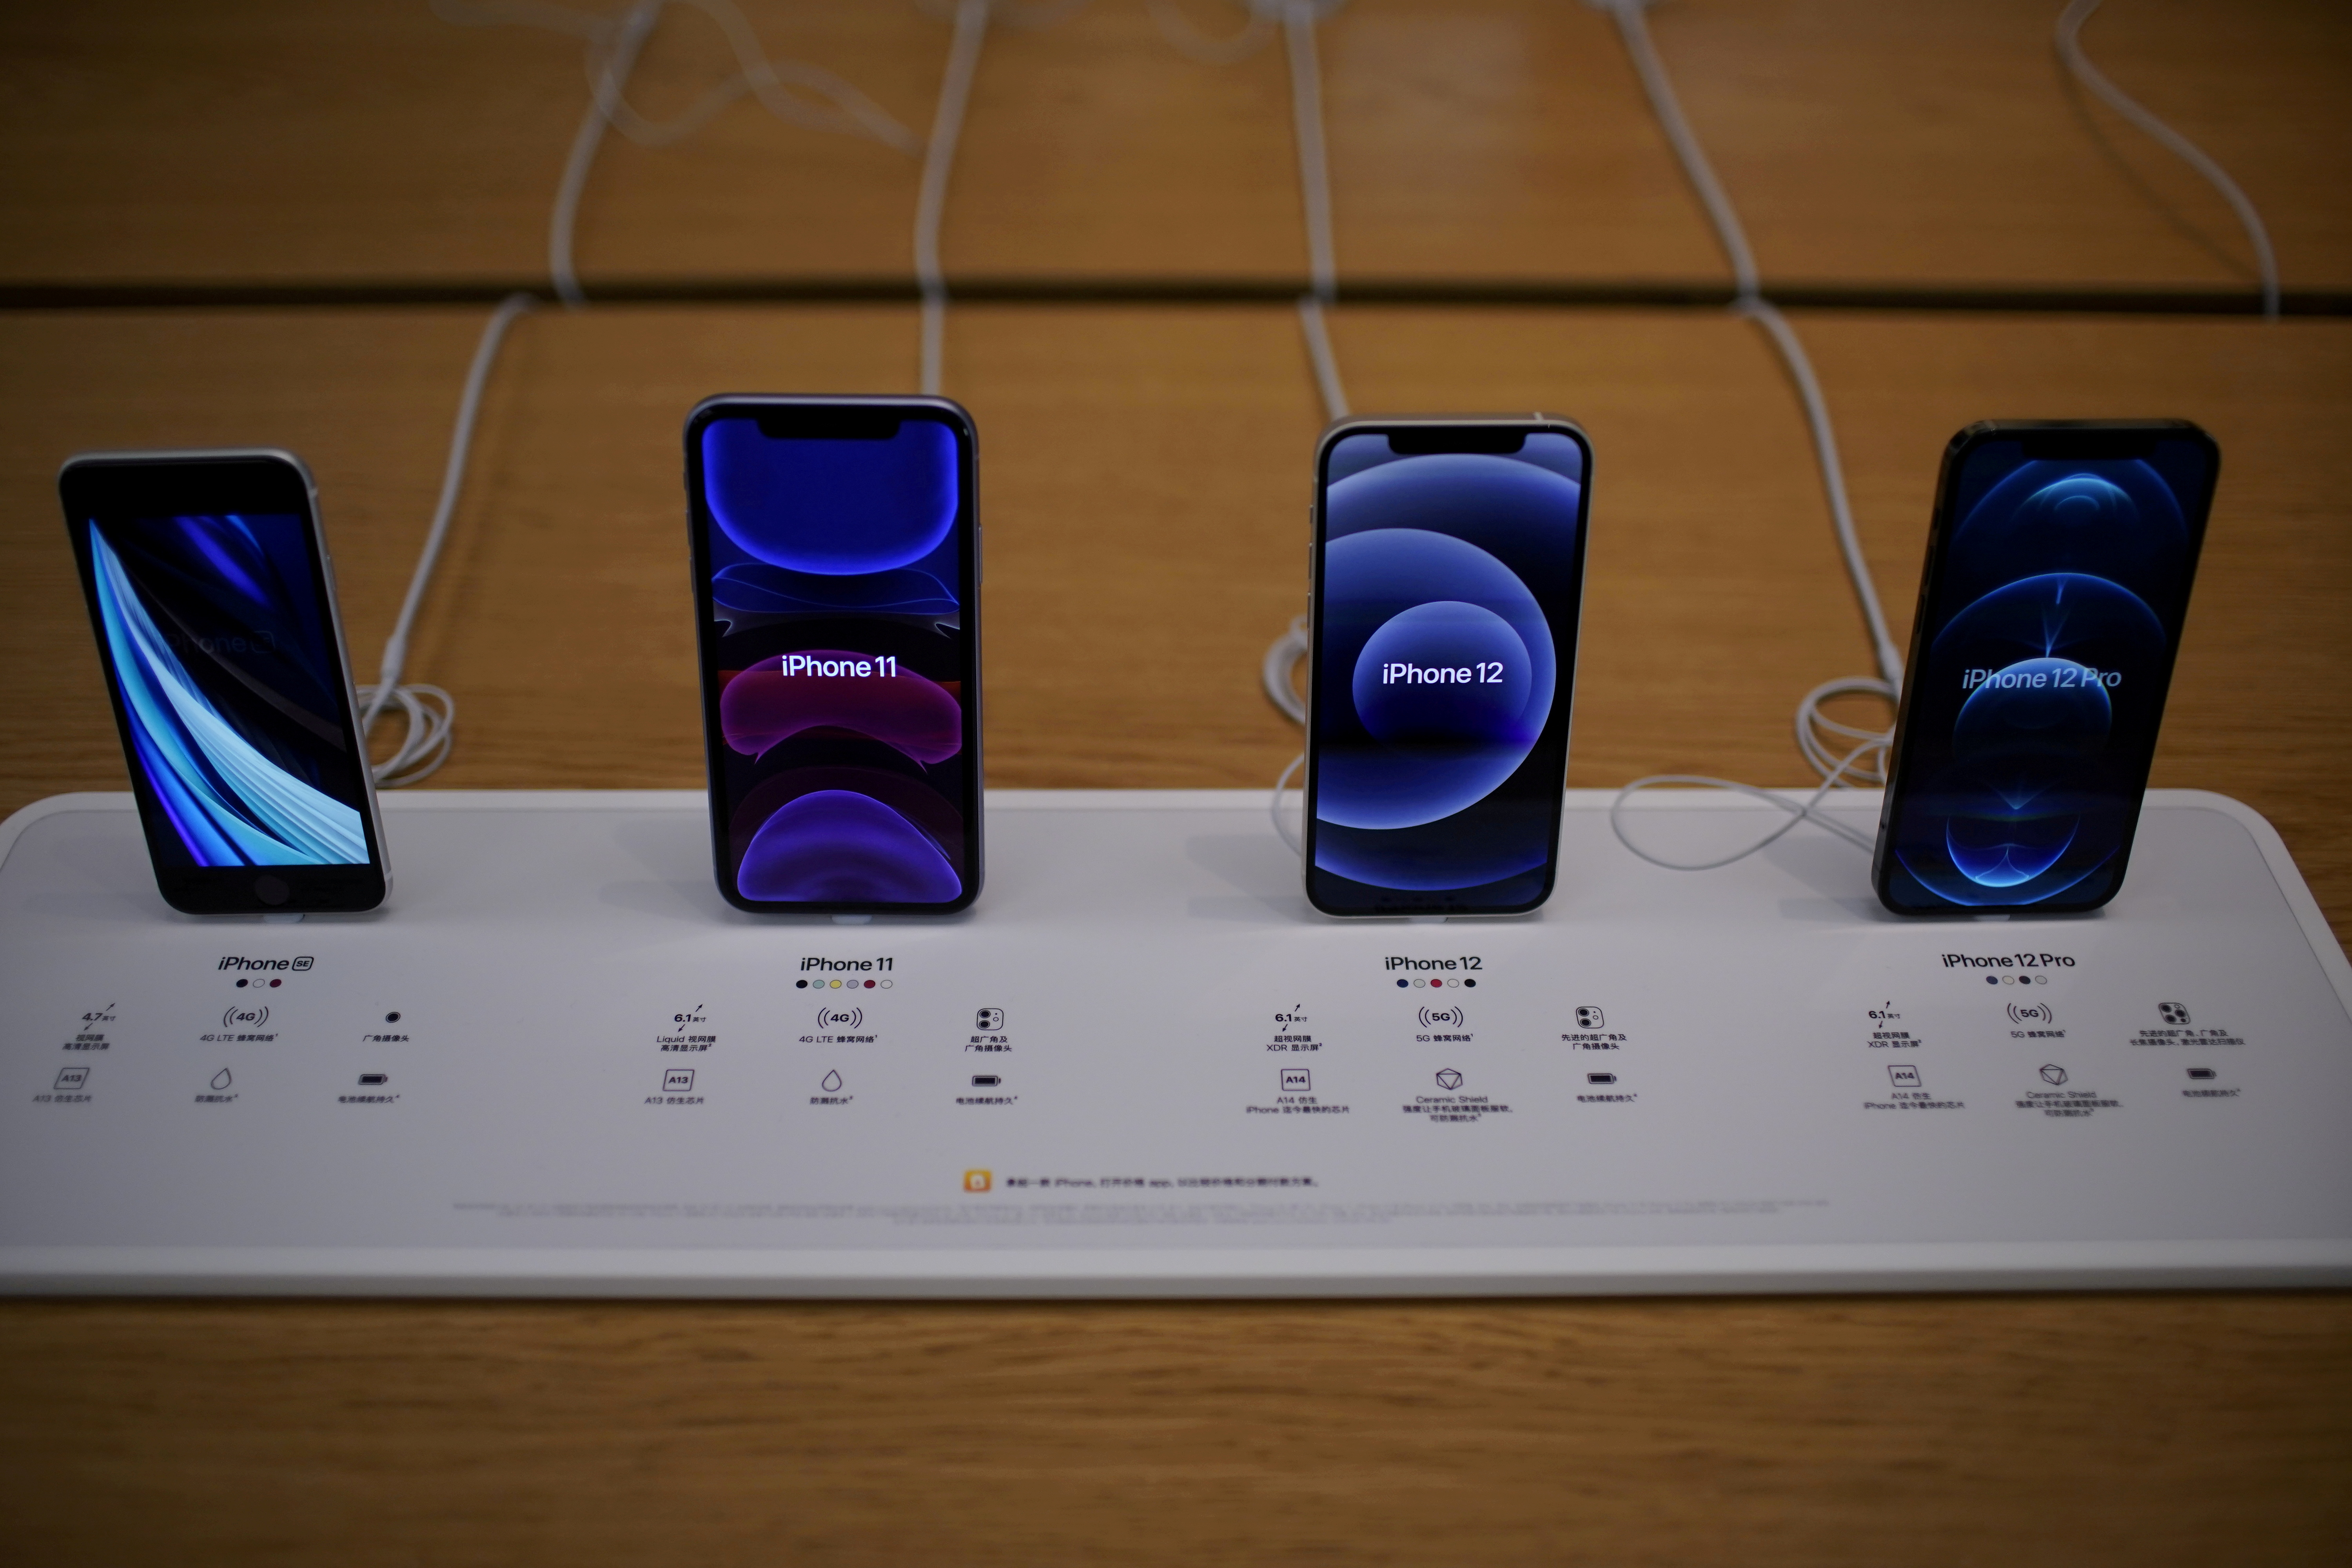 Apple's 5G iPhone 12 and iPhone 11 are seen at an Apple Store in Shanghai